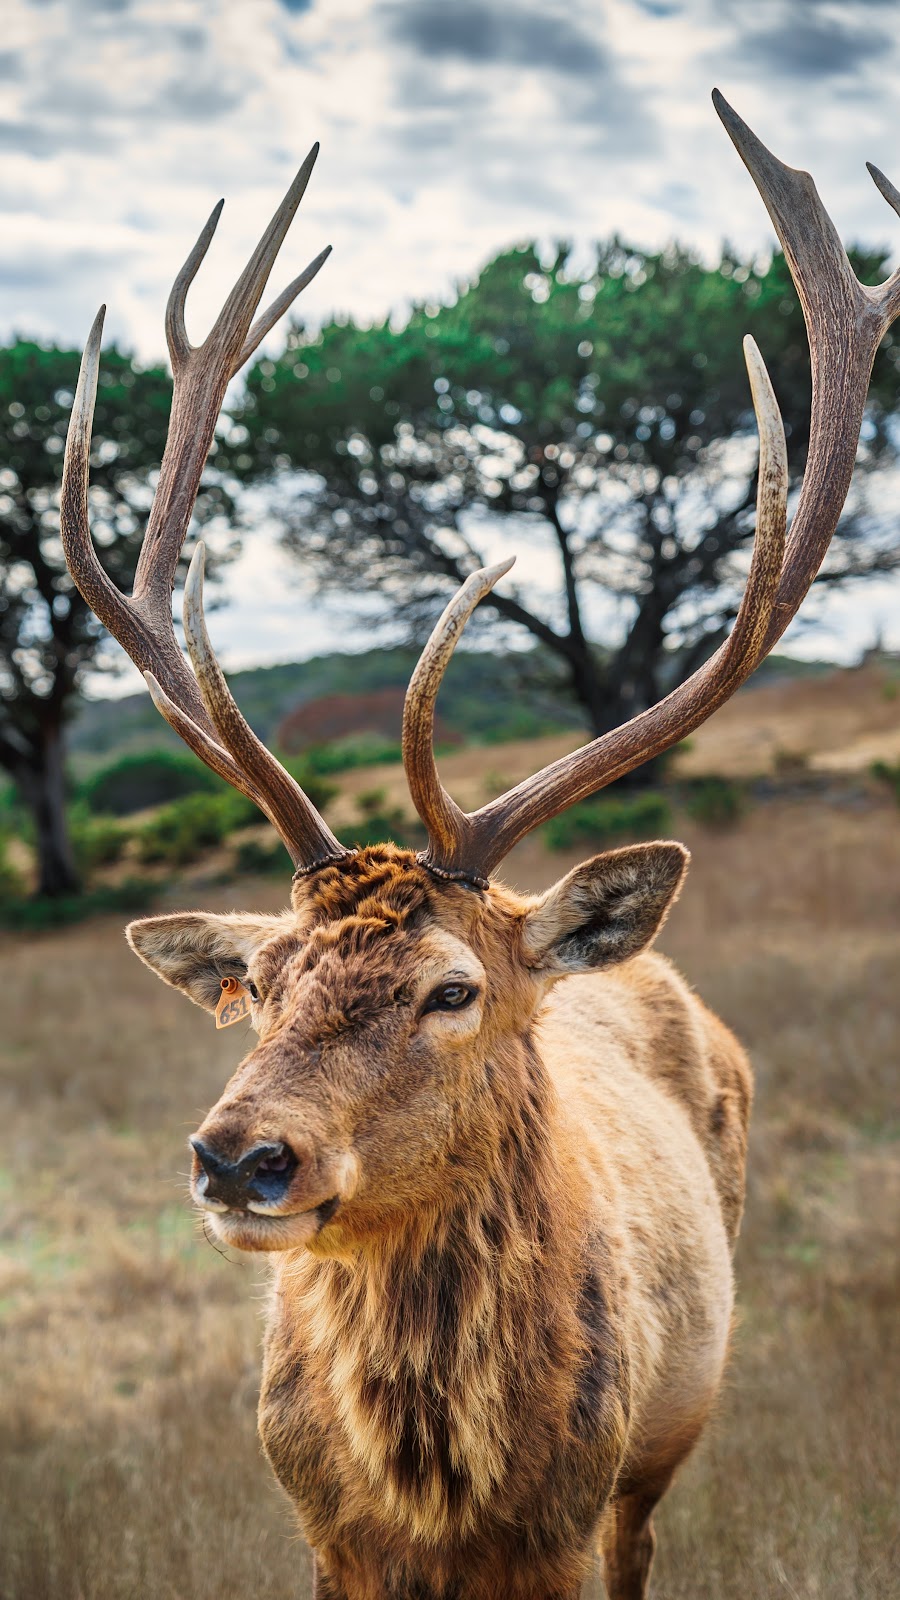 Portrait of antlered animal against slightly blurred background of grass, trees, and a blue sky